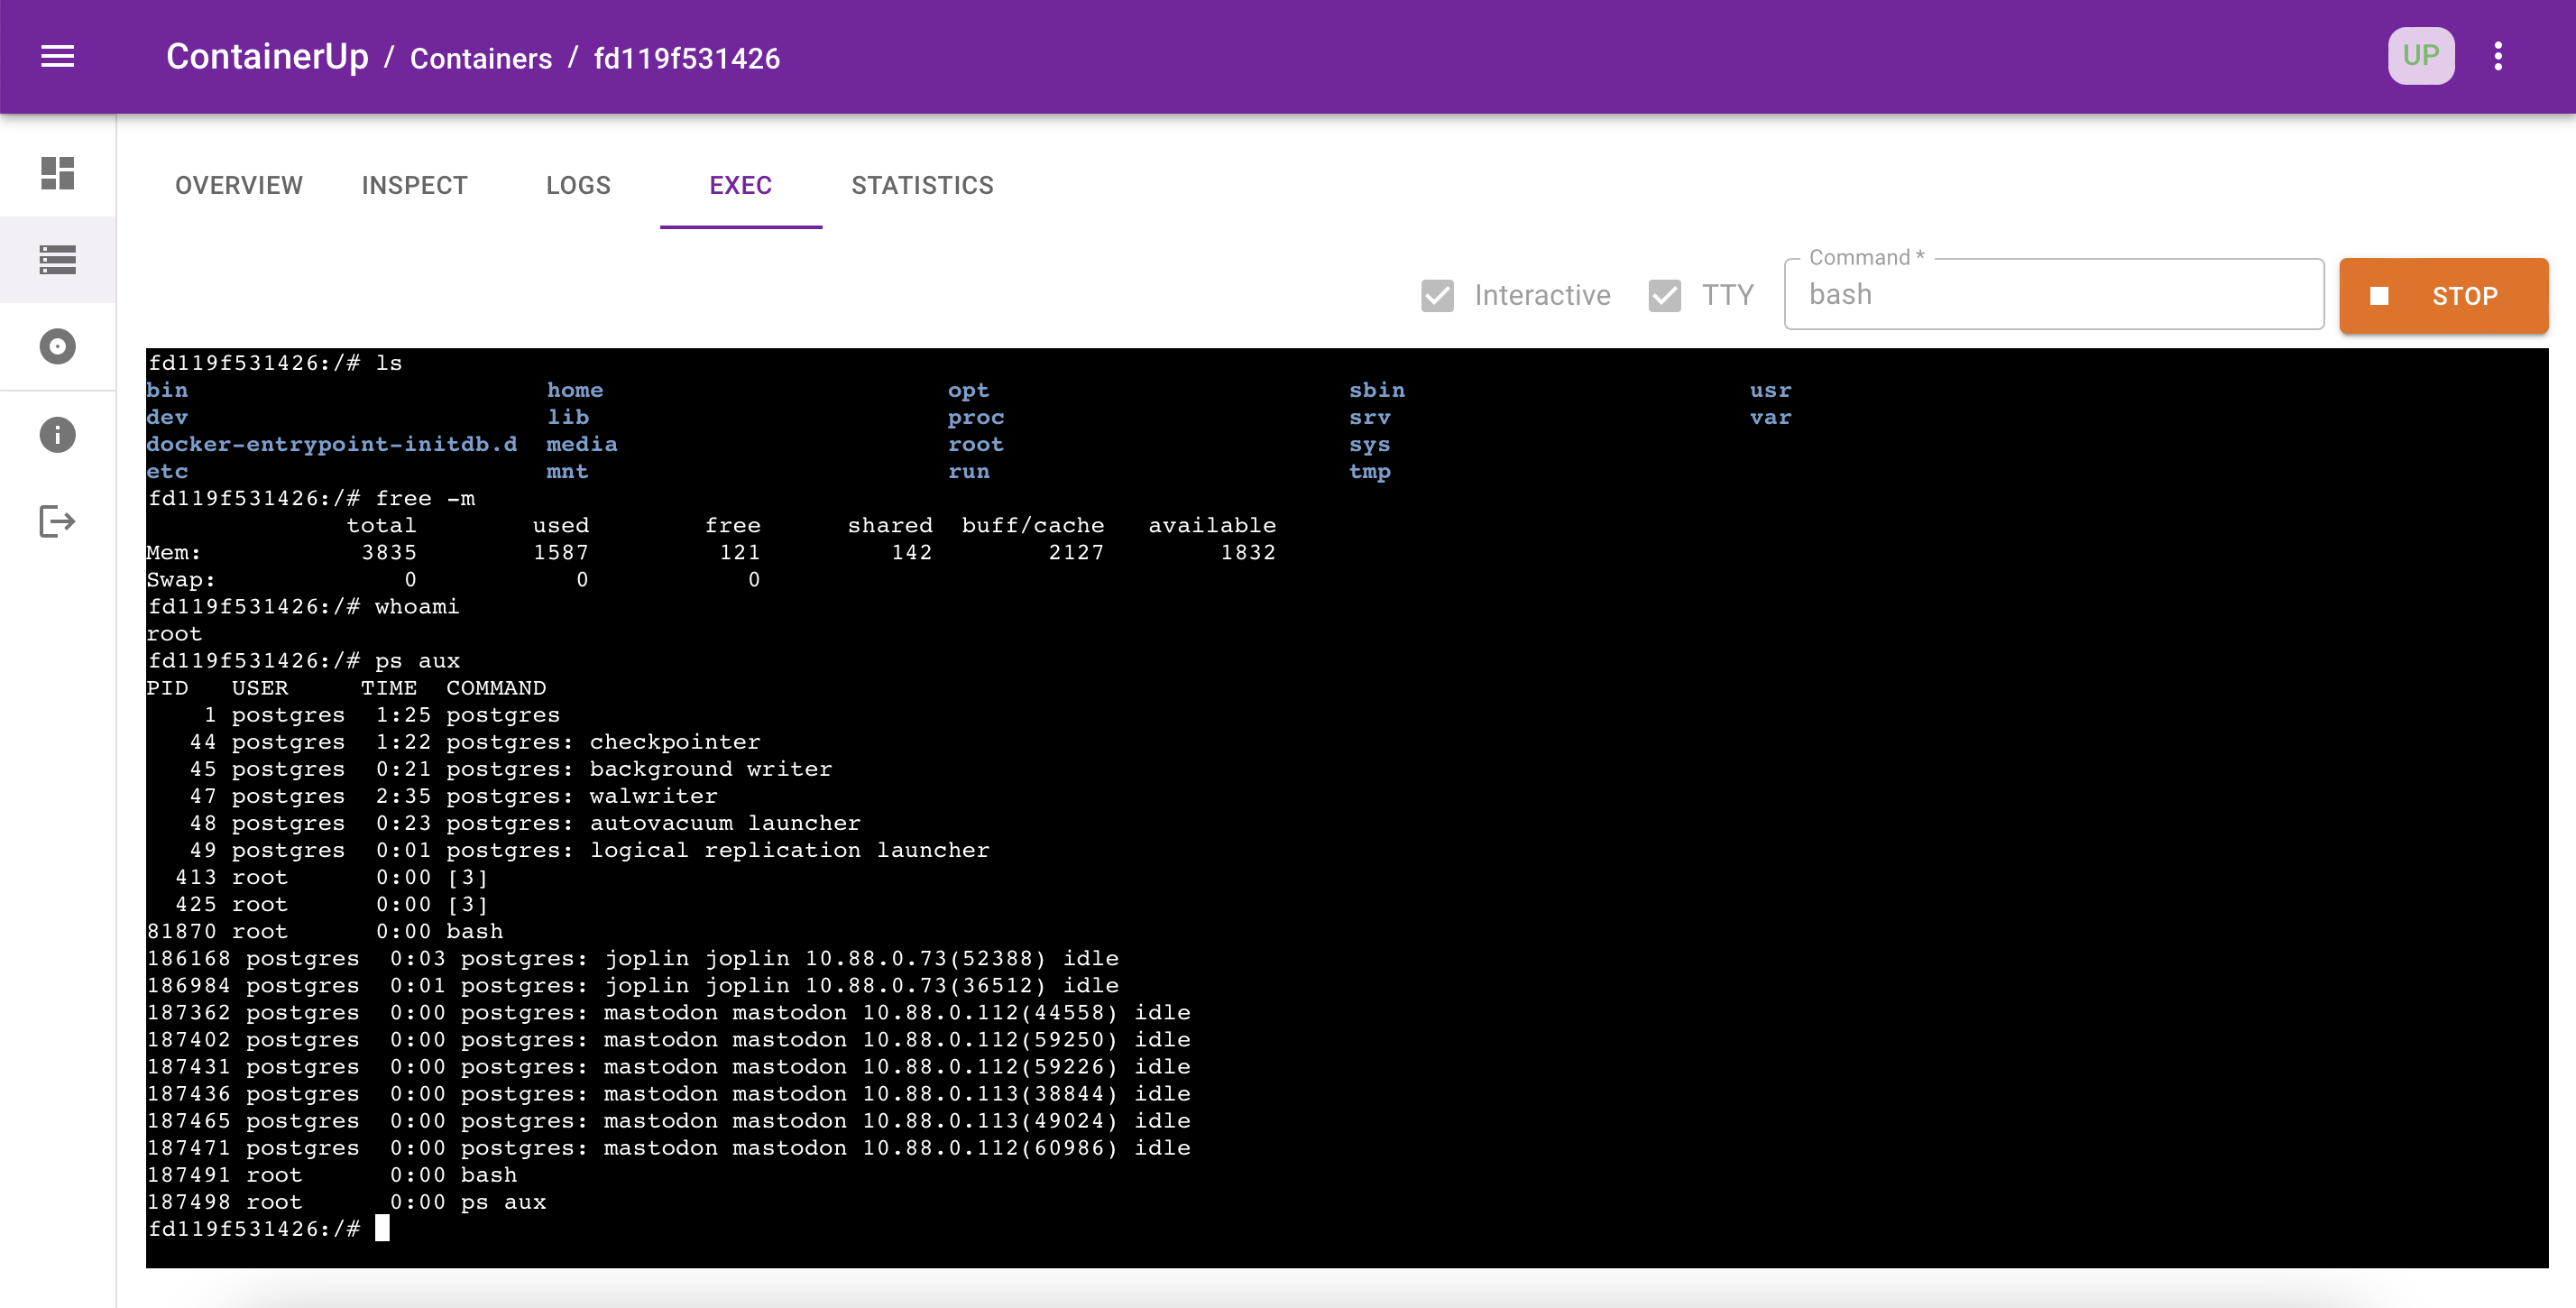 Screenshot of container exec page